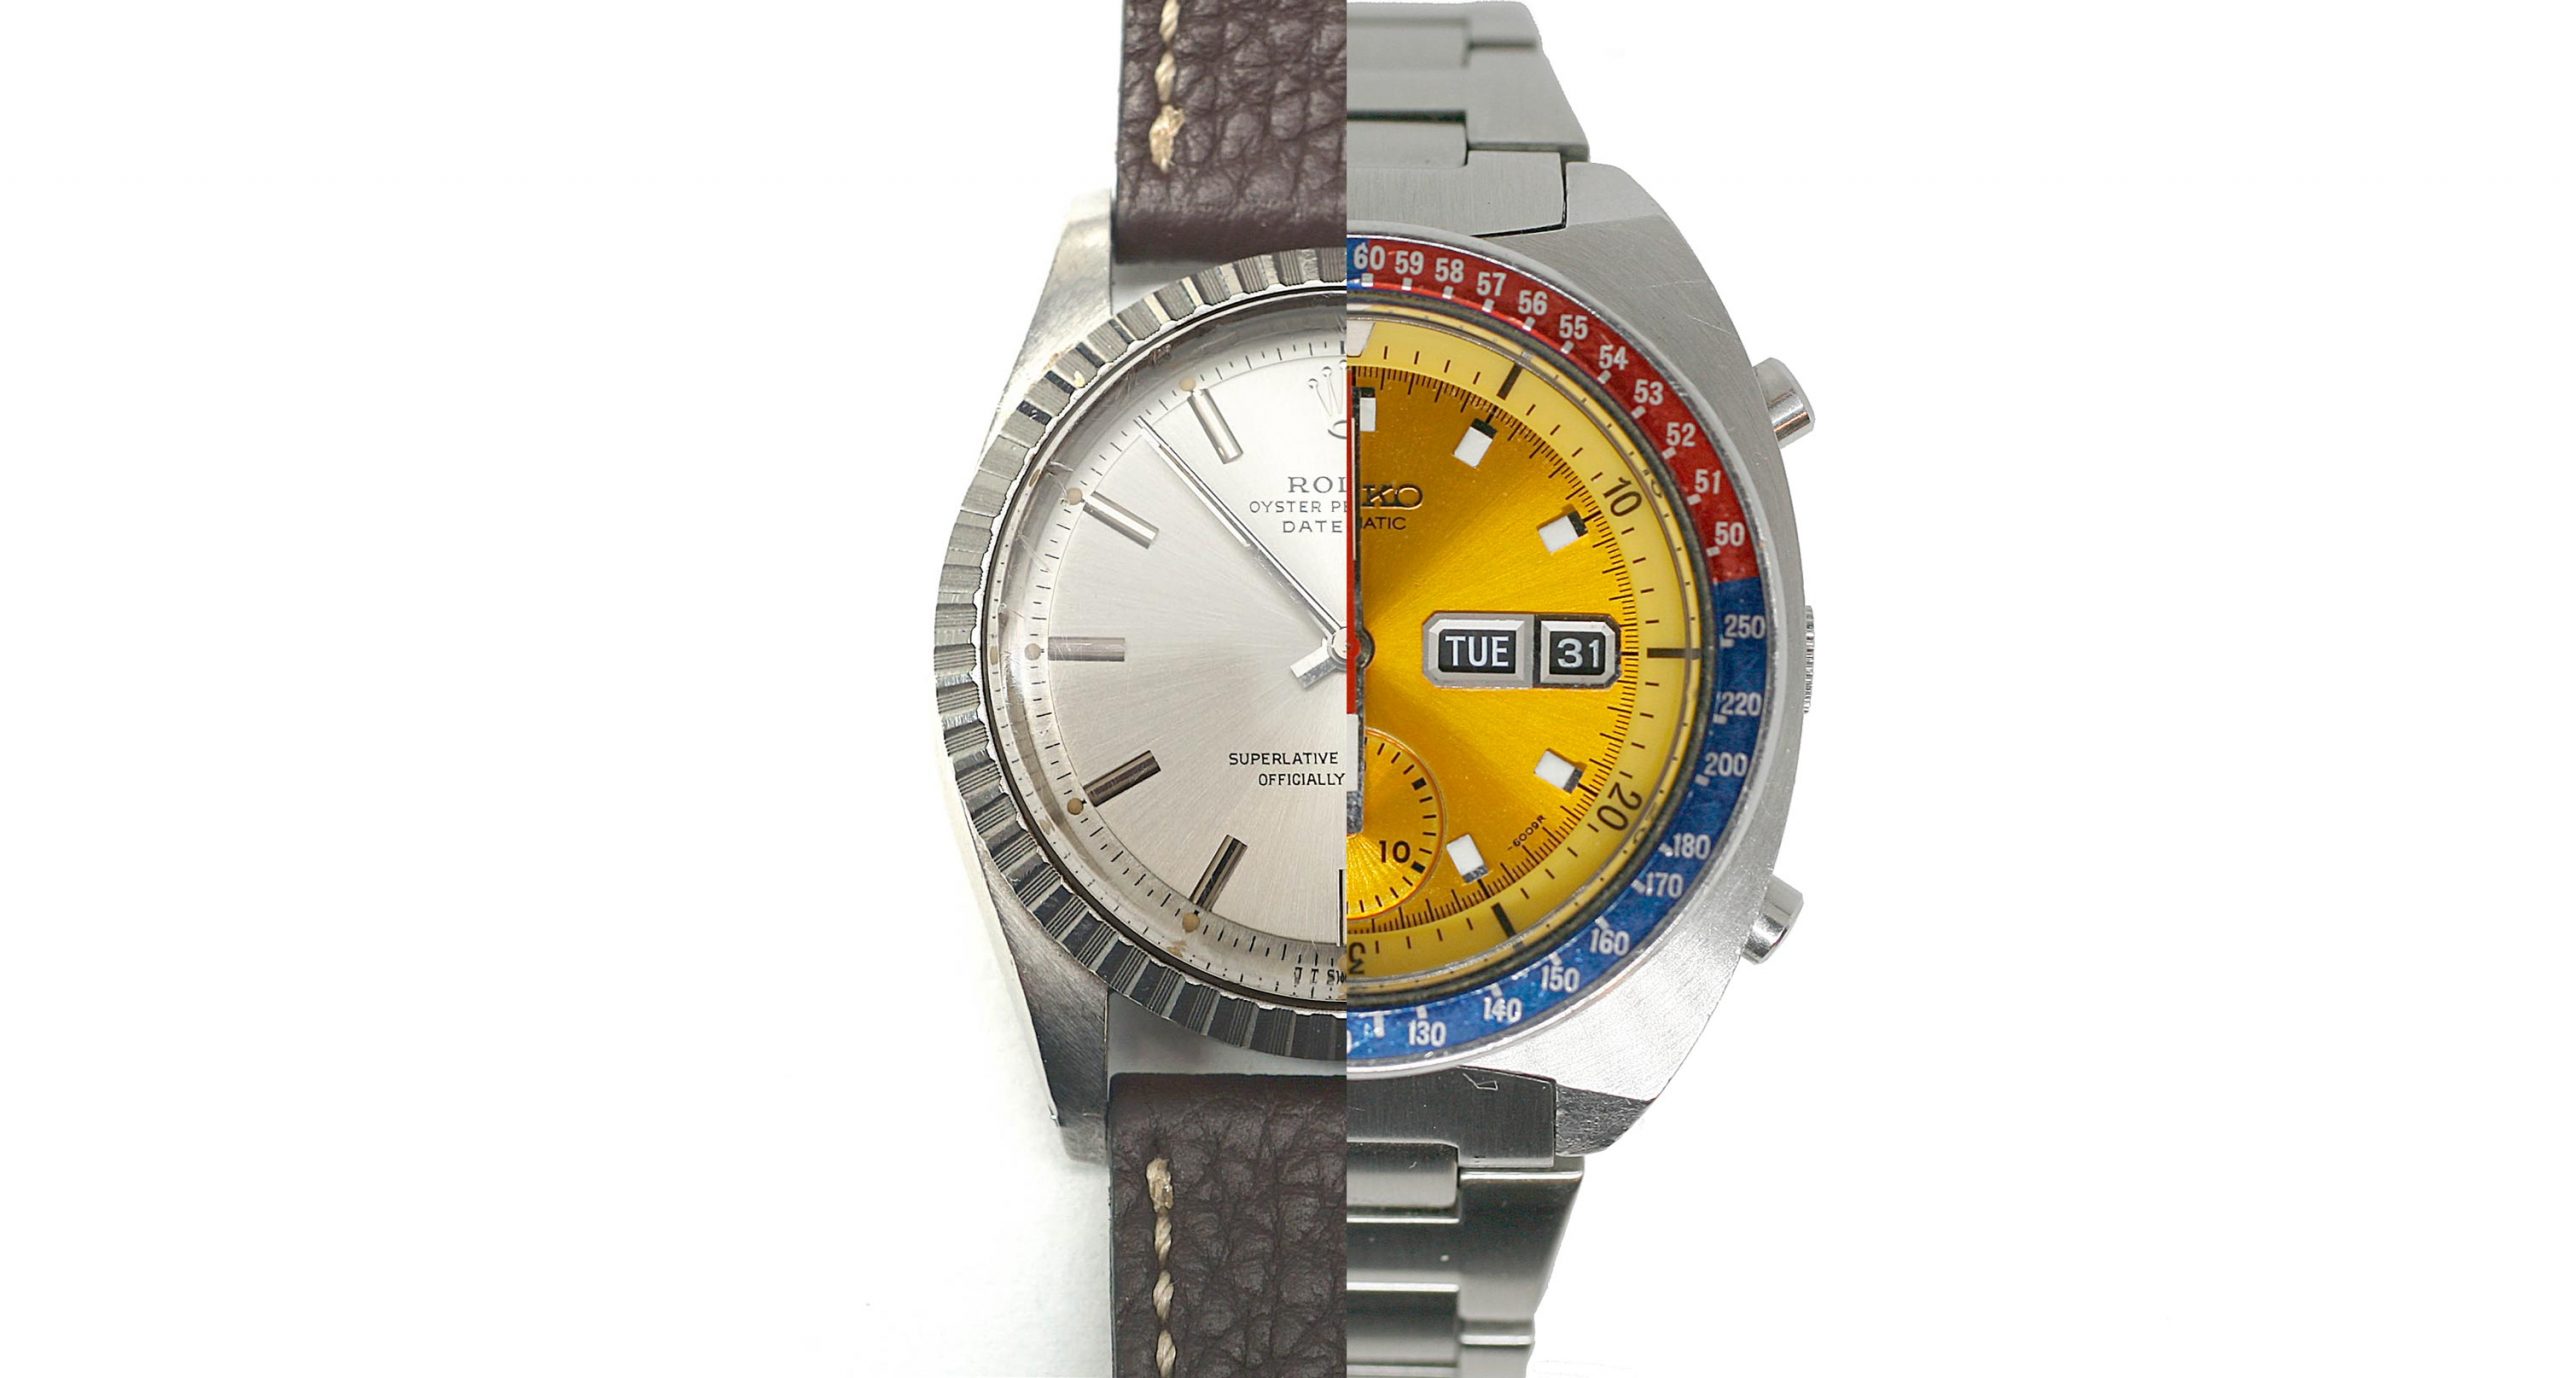 Our Watches - Swapping a 1972 Rolex Datejust 1603 for a 1976 Seiko 6139-6002  Pogue - BEYOND THE DIAL